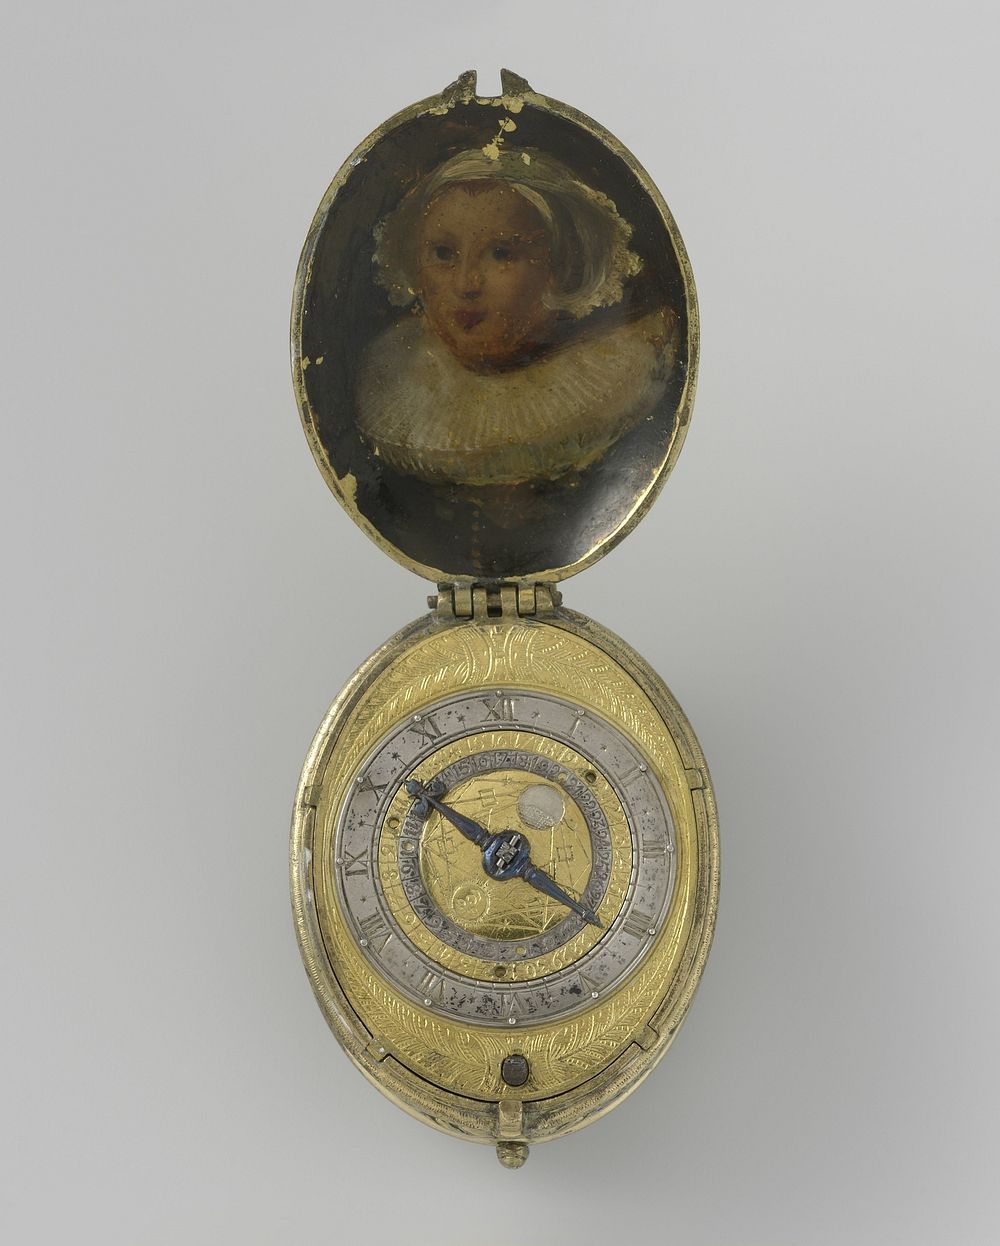 Pendant Watch, with Indicators for the Date and Phases of the Moon, and an Aspectarium (c. 1610 - c. 1625) by Wybe Wijbrants…